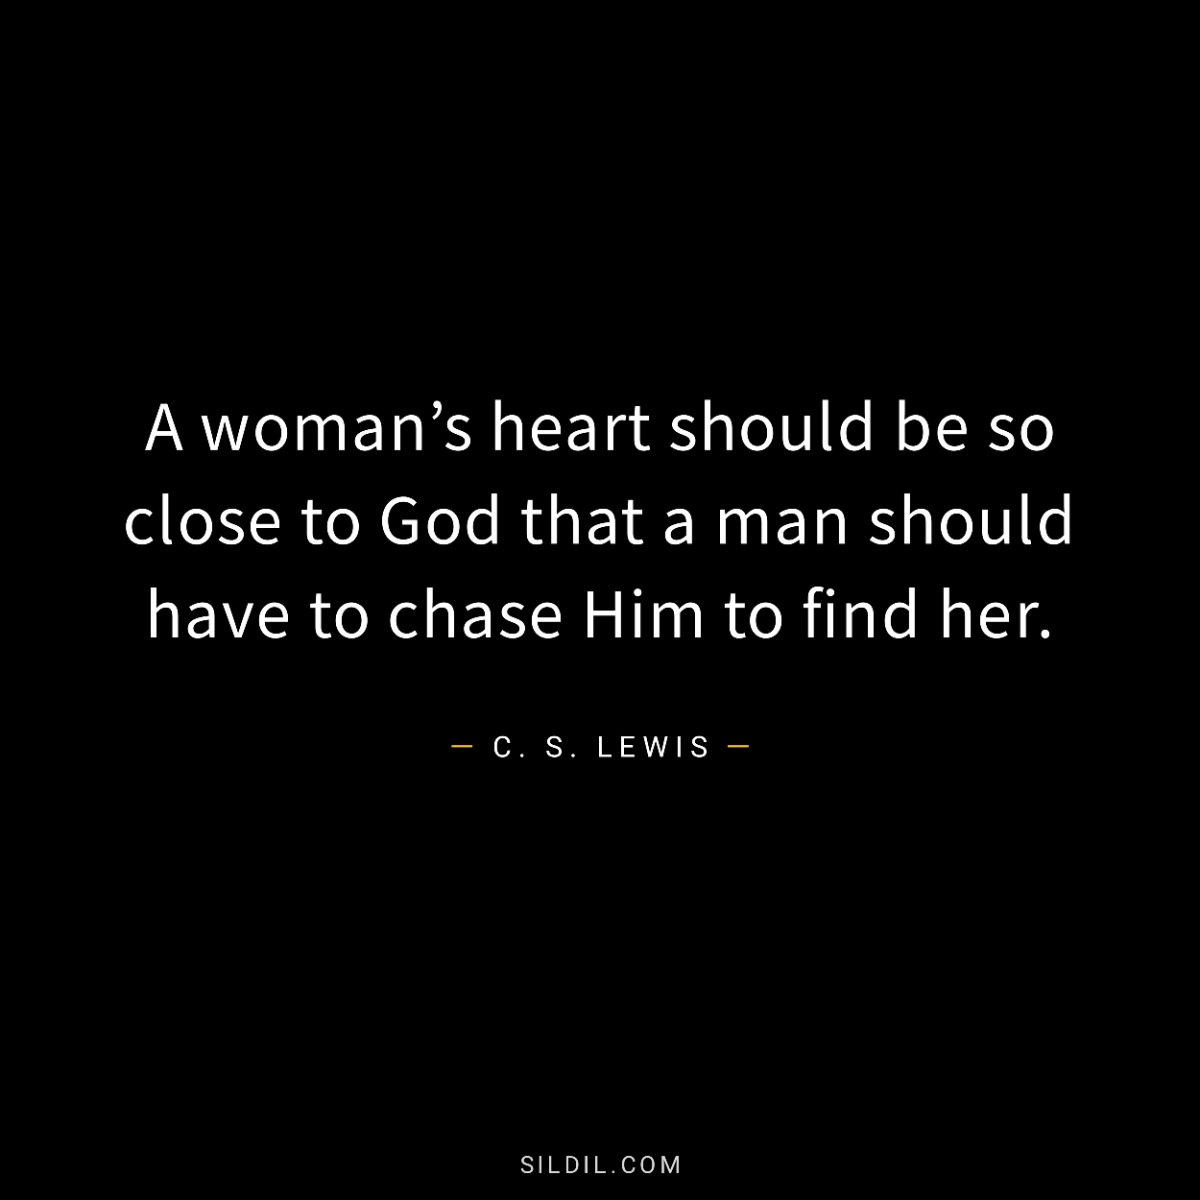 A woman’s heart should be so close to God that a man should have to chase Him to find her.